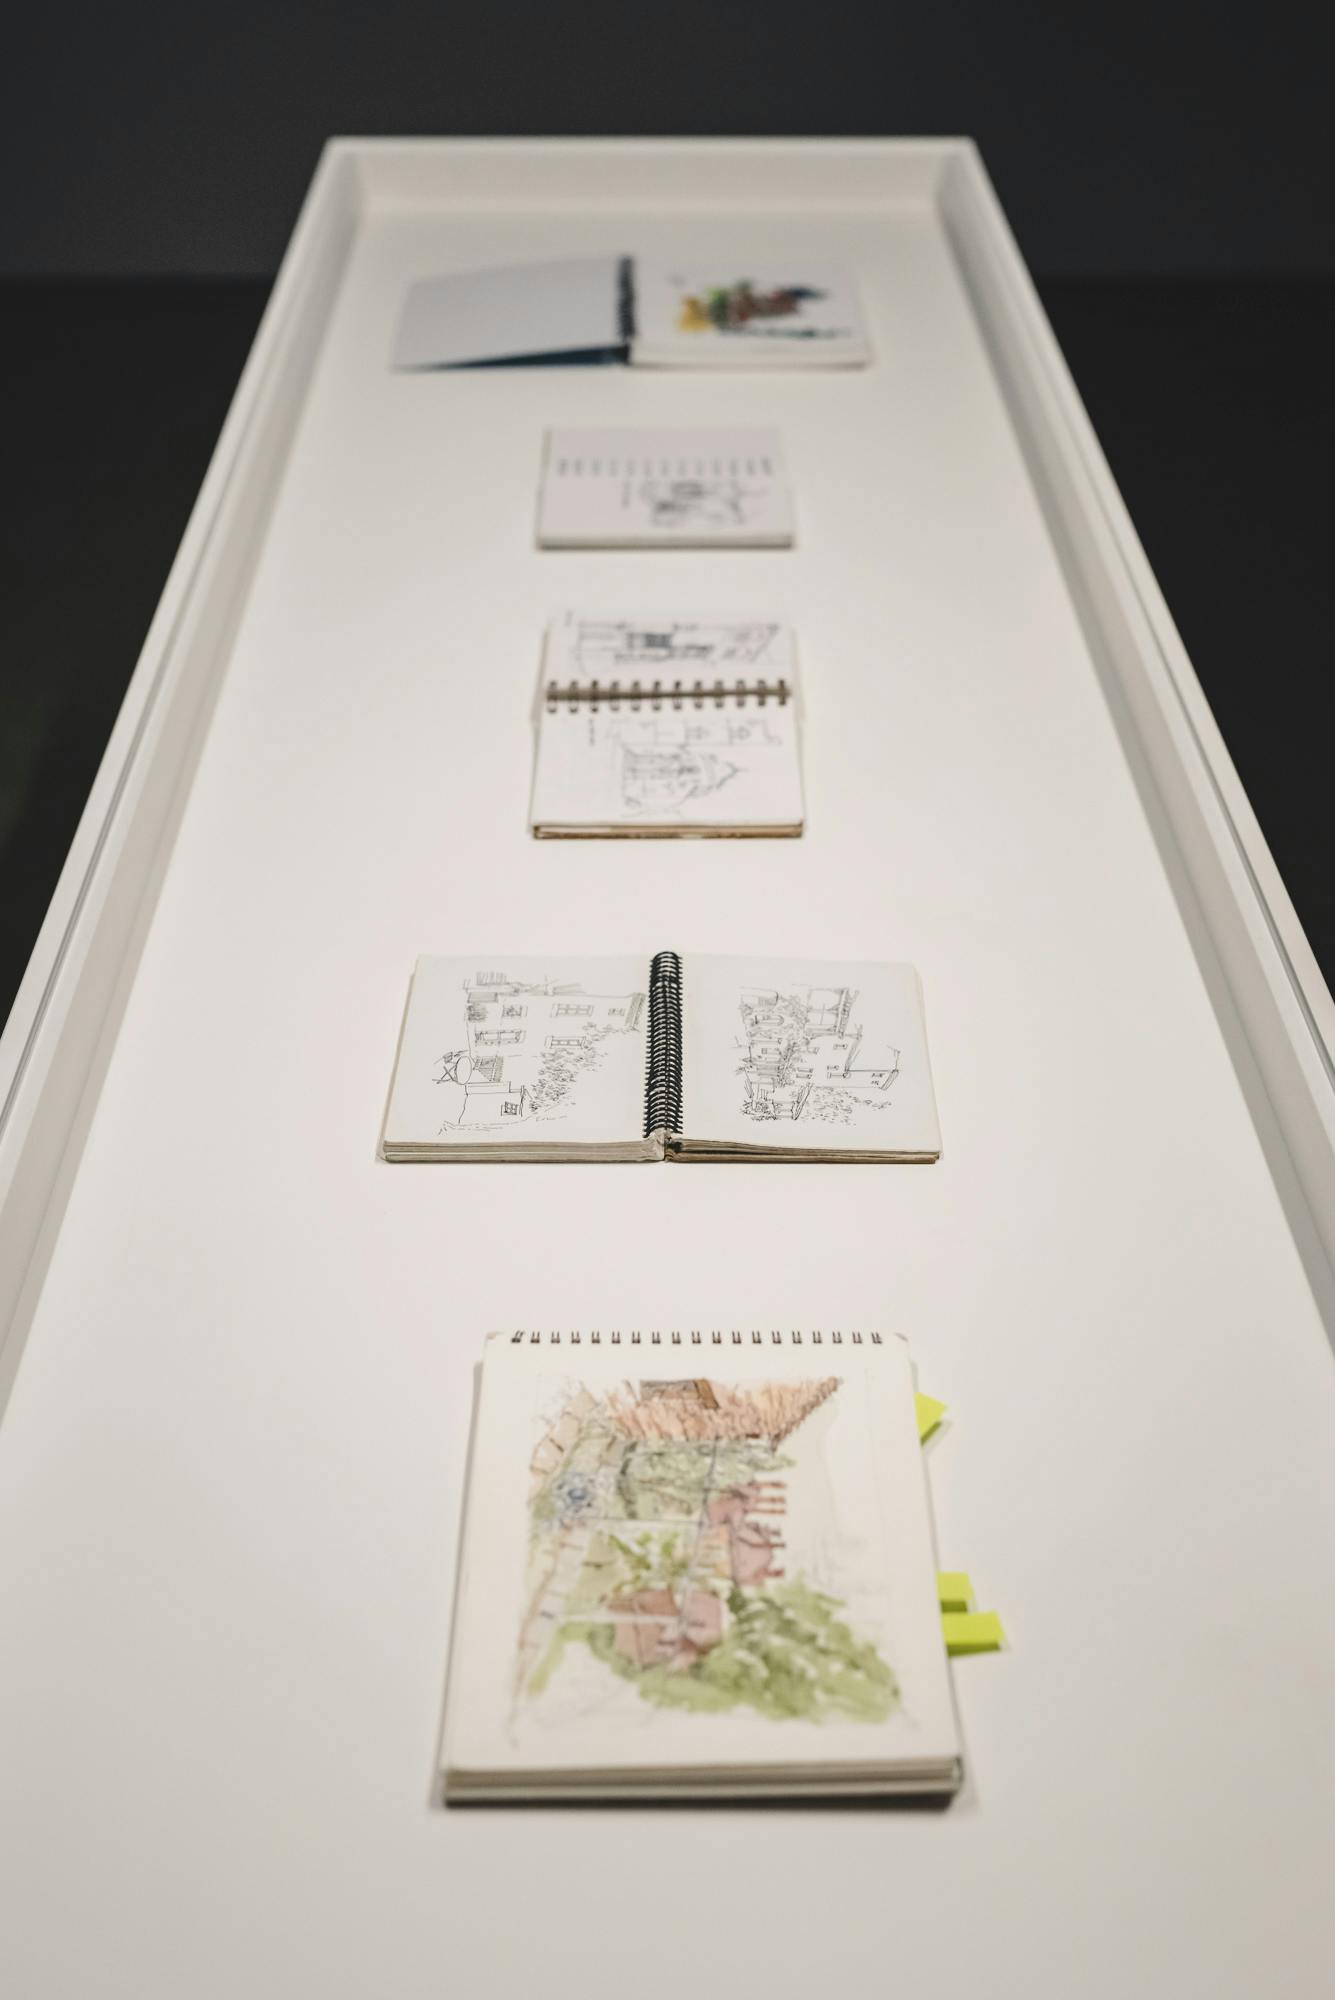 A white vitrine which contains five open sketchbooks showing images on buildings and landscapes.